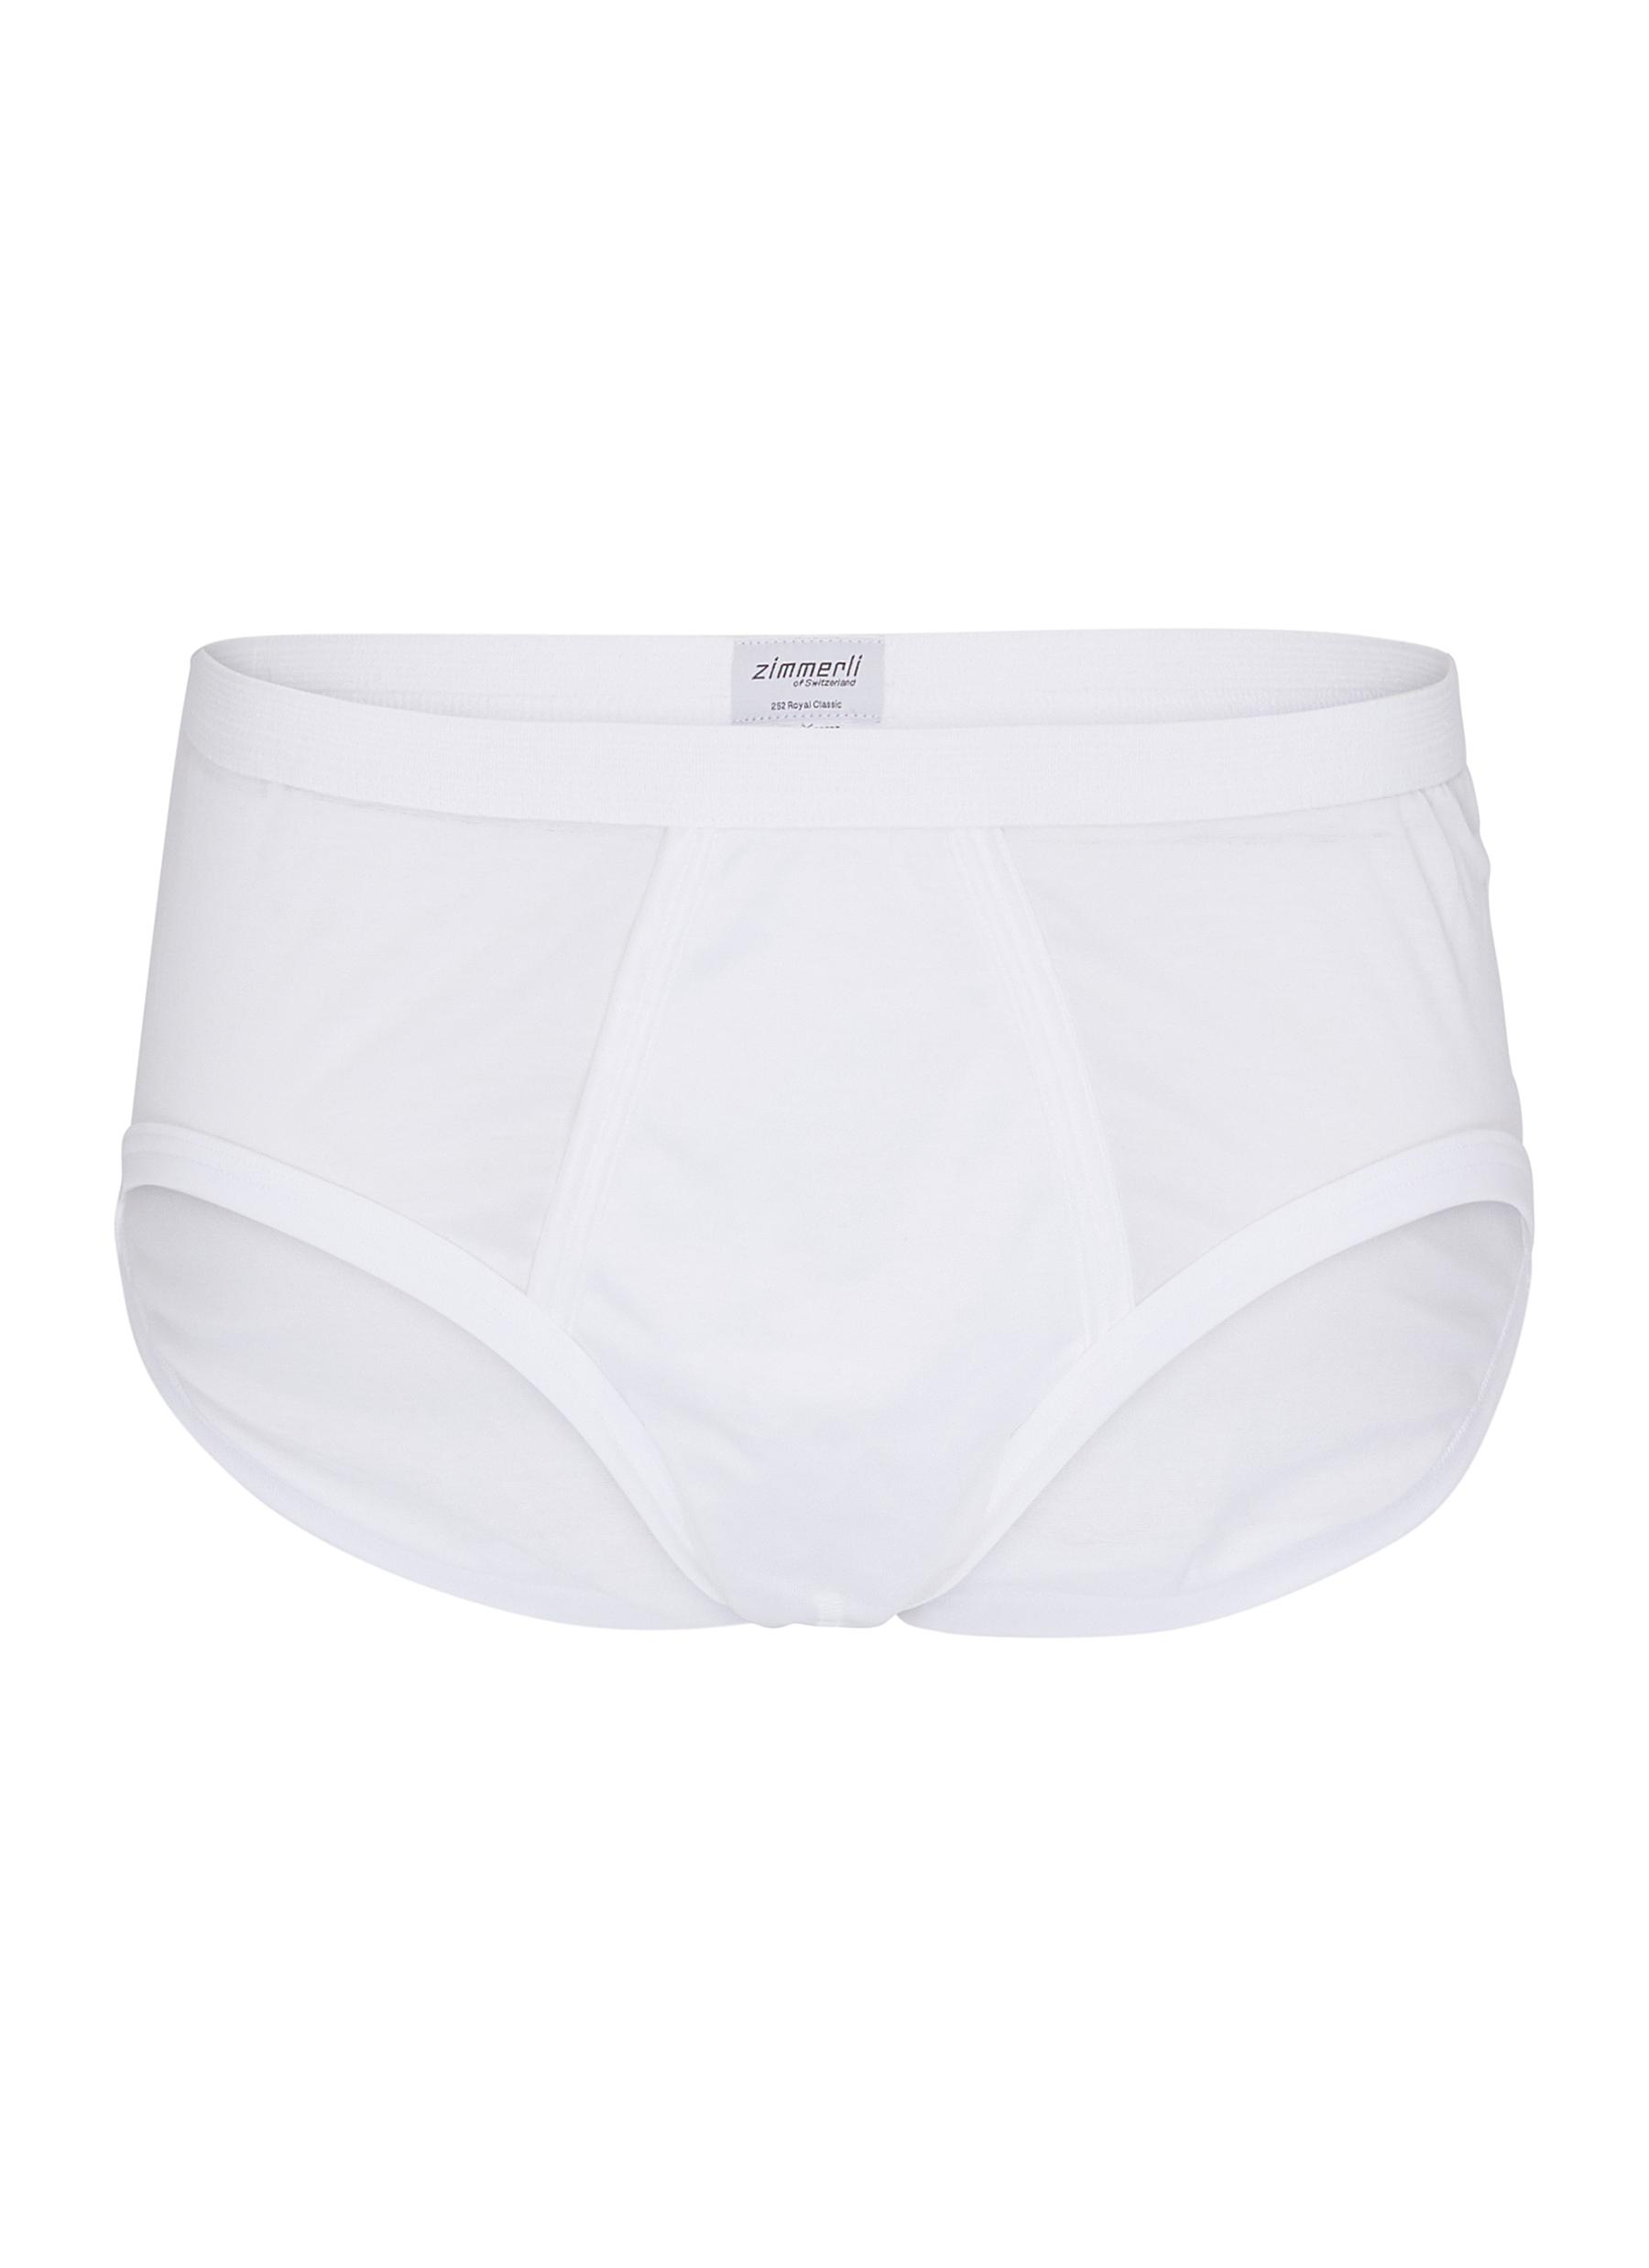 ‘Royal Classic’ Cotton Open Fly Briefs